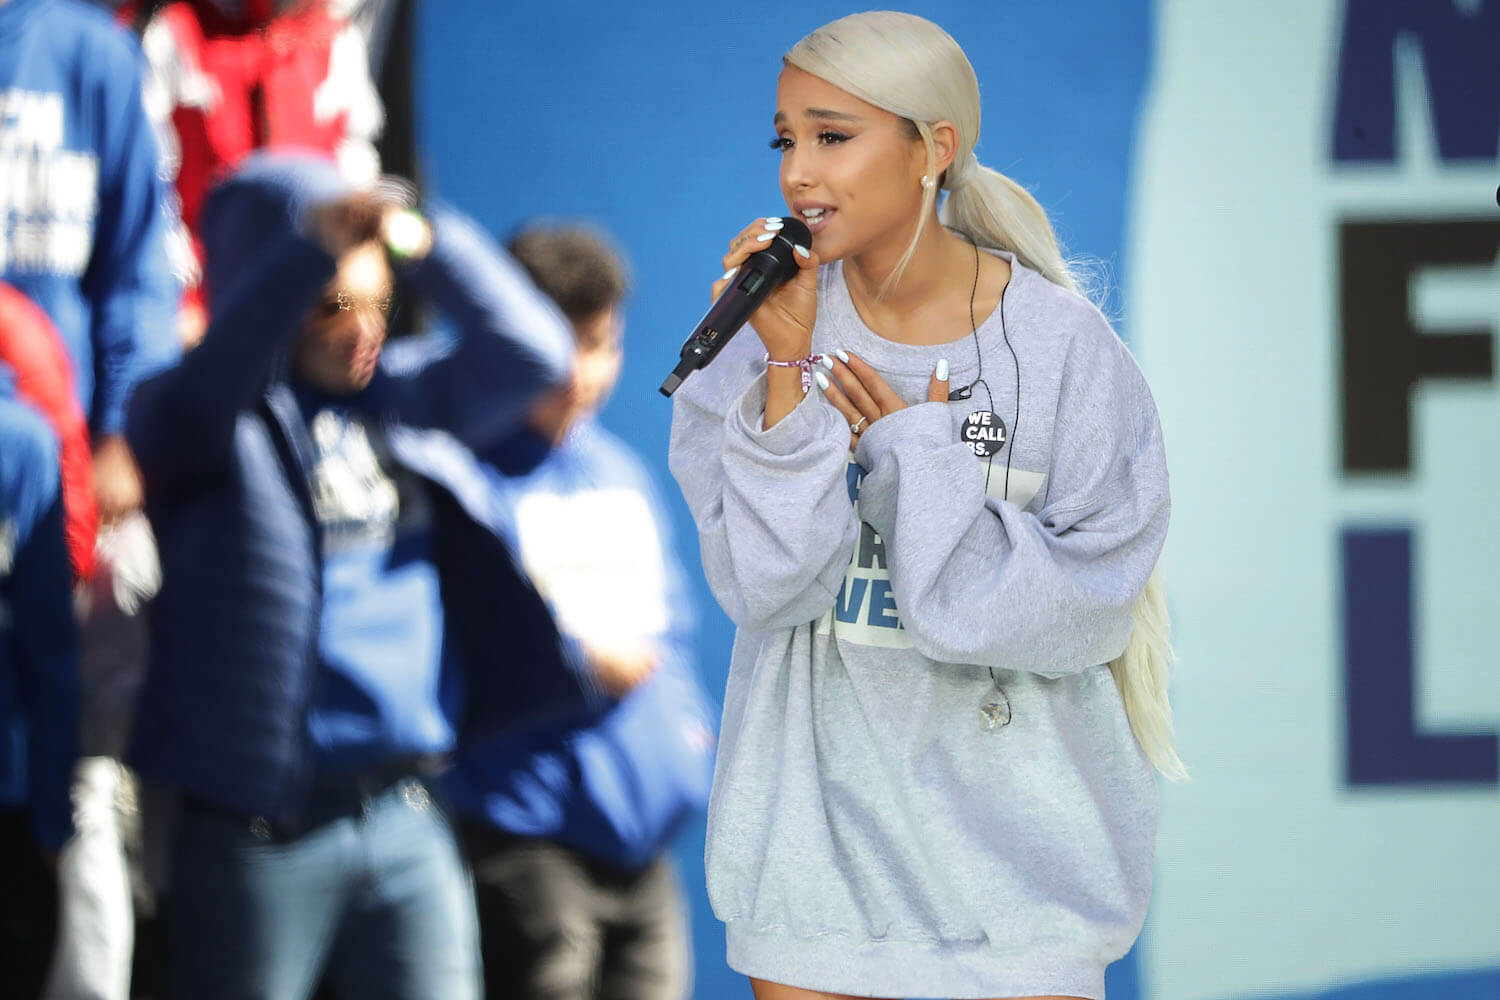 Ariana Grande singing into a microphone on an outdoor stage